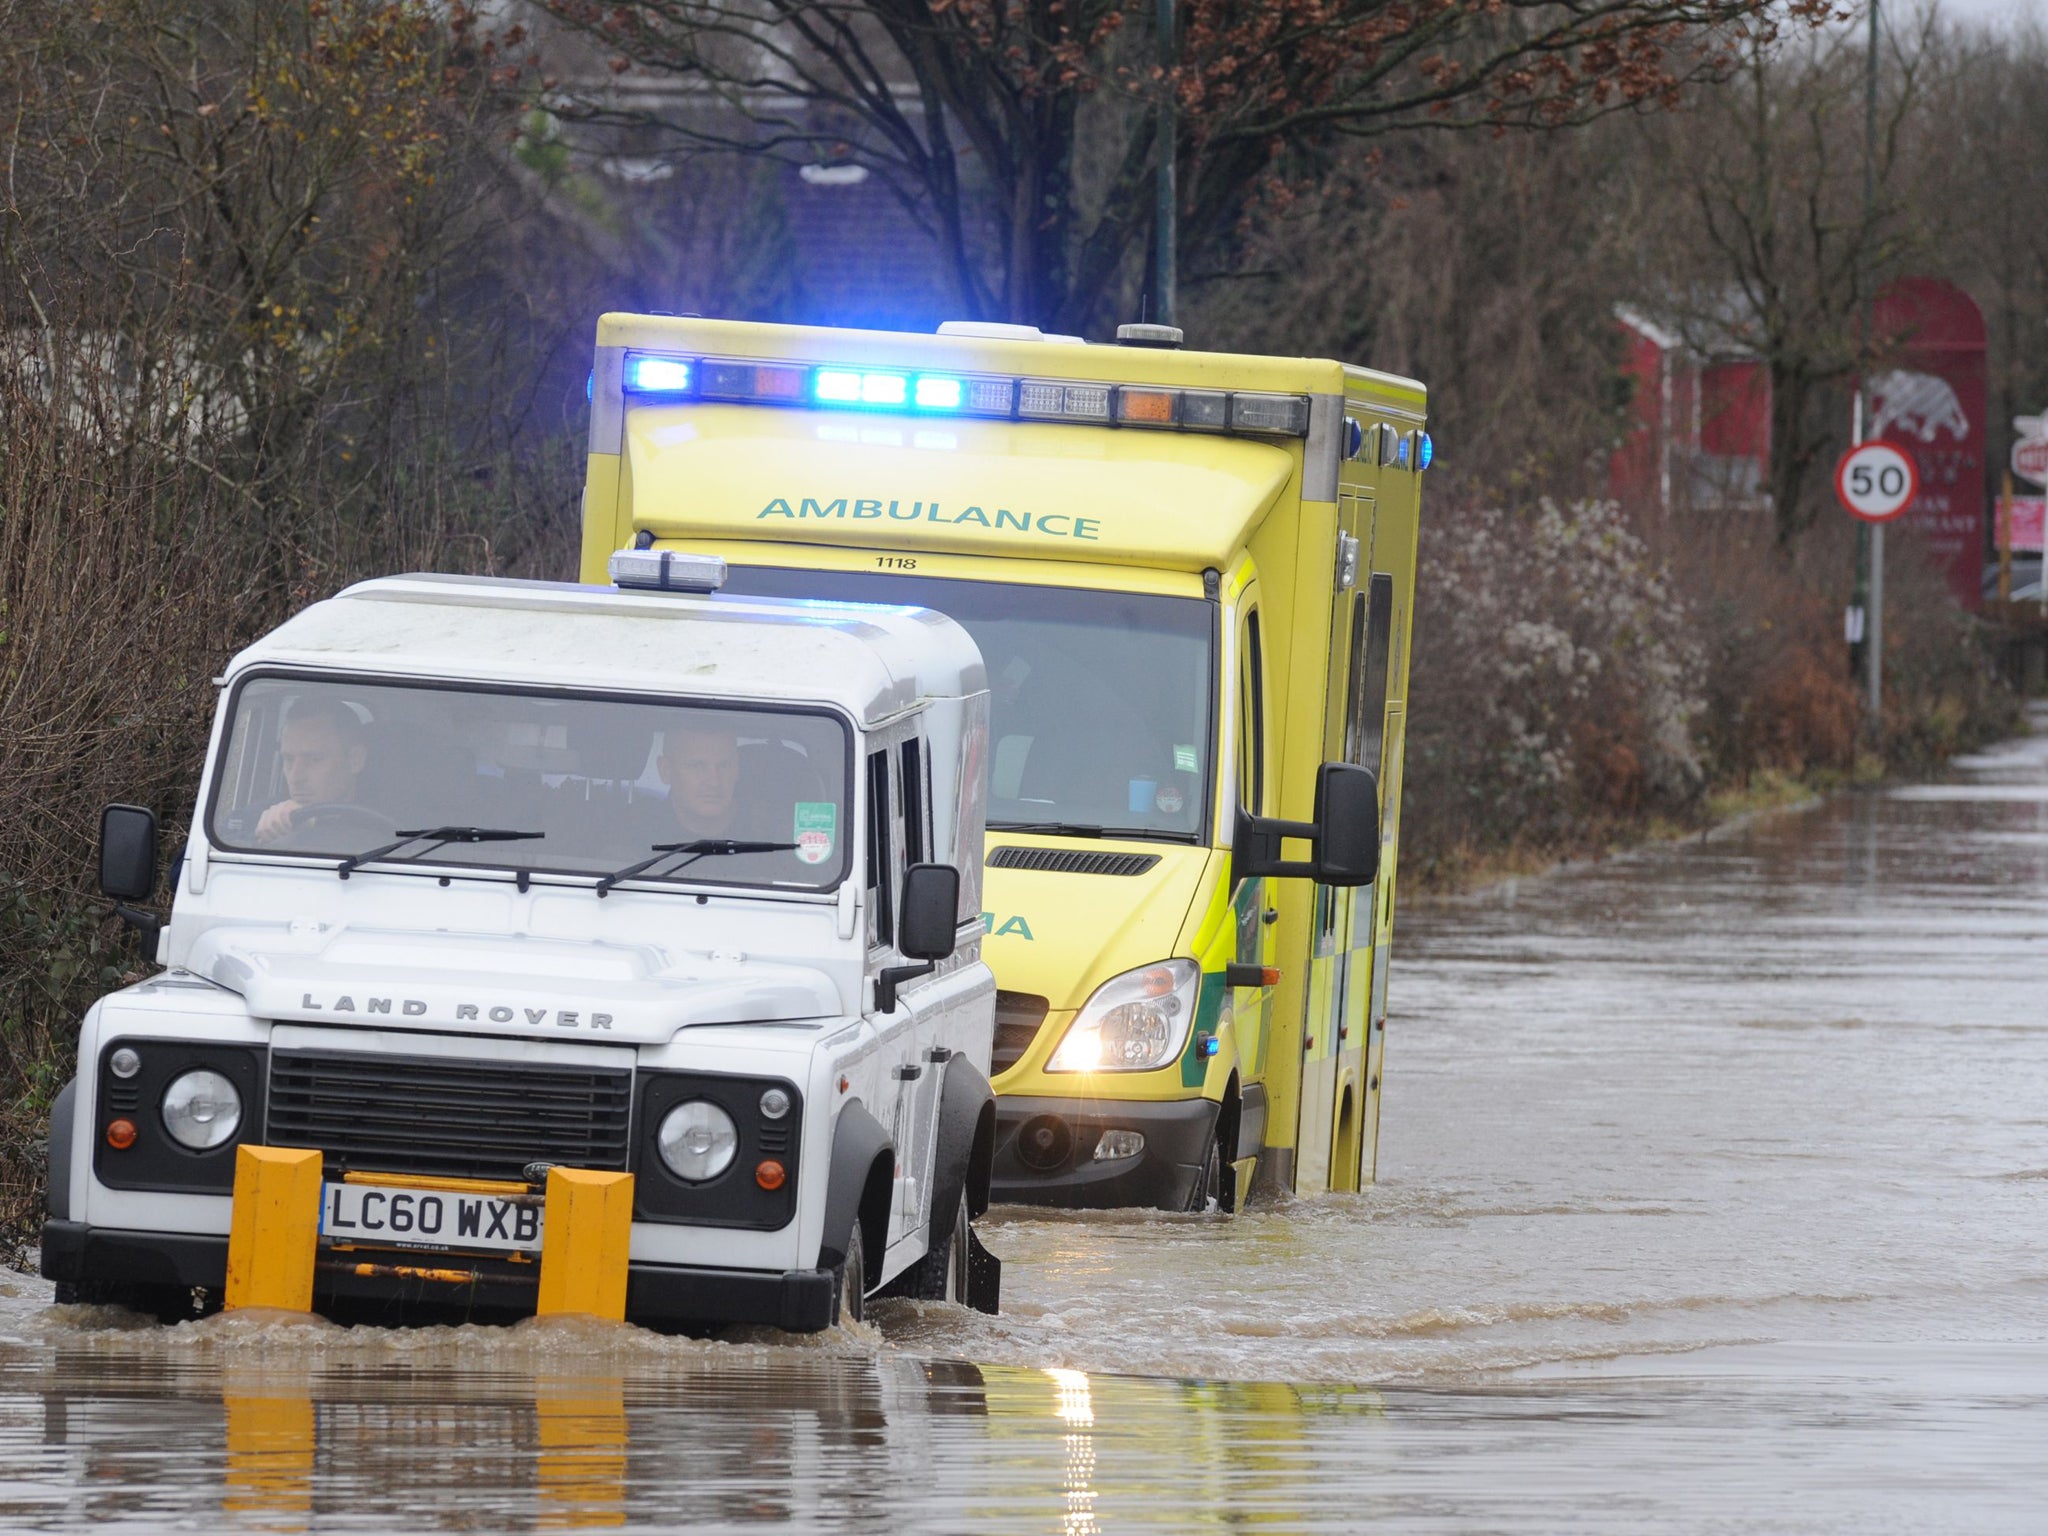 An ambulance on route to a 999 call heads into flood water at Polhill in Kent with help from men in a white jeep in front